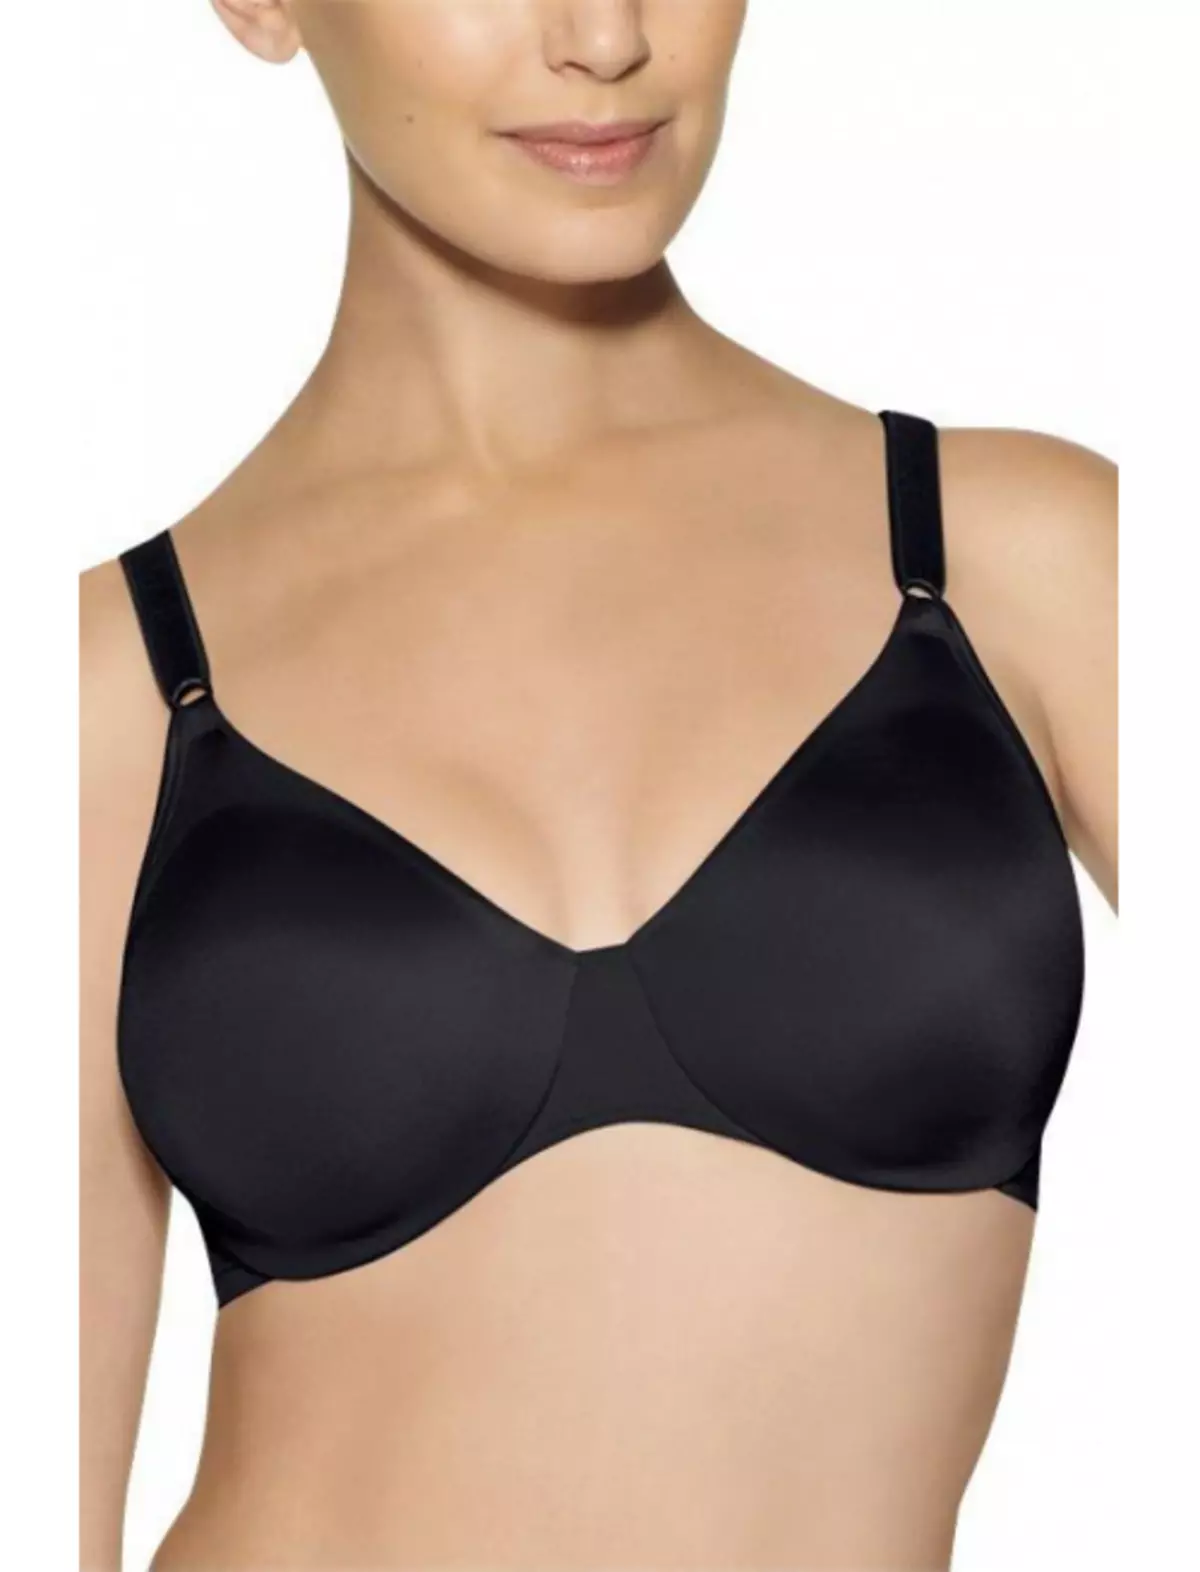 Seamless vehicle (54 photos): Bra leaf with molded cups and bones, reviews 14925_54